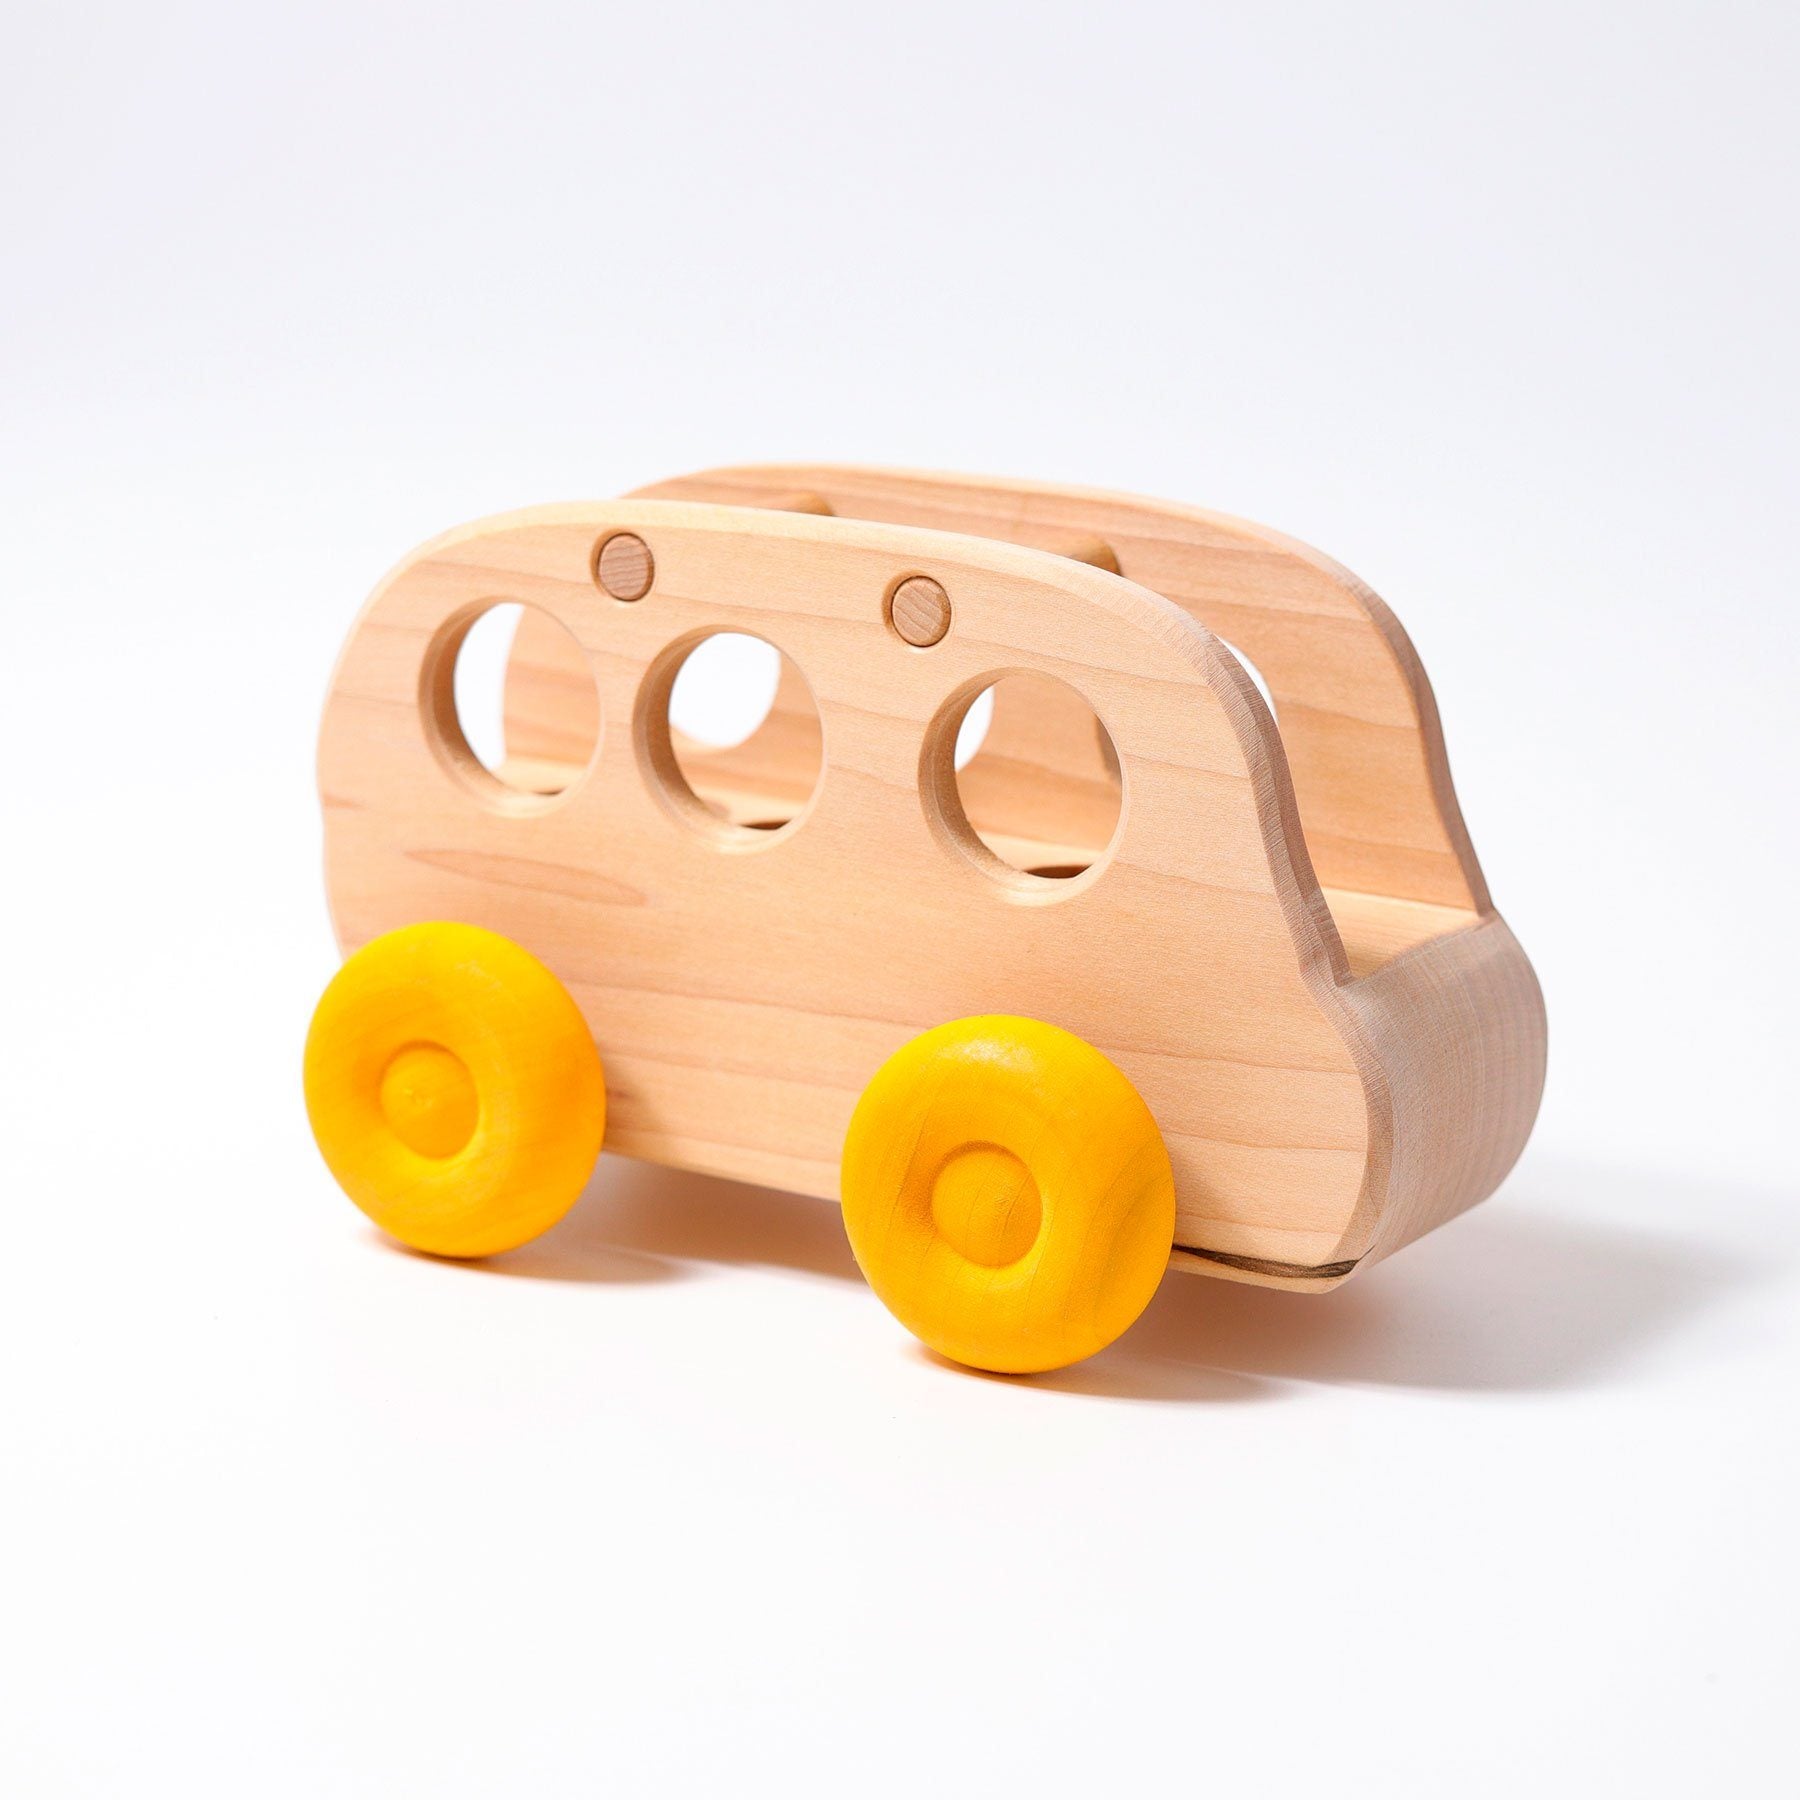 A wooden natural bus with yellow wheels. Side view.